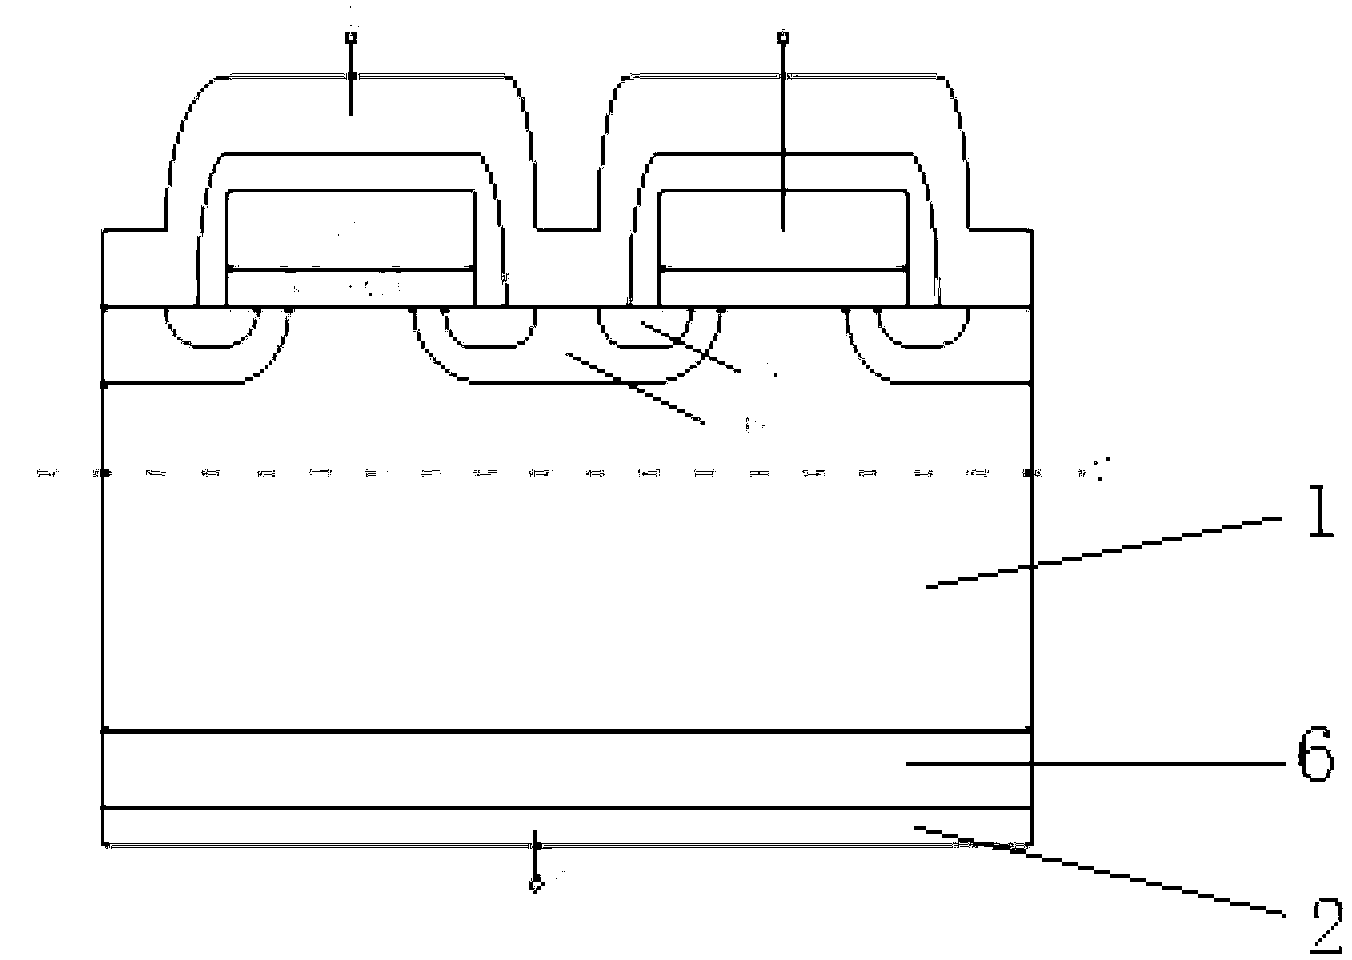 Collector back side structure of insulated gate type bipolar transistor